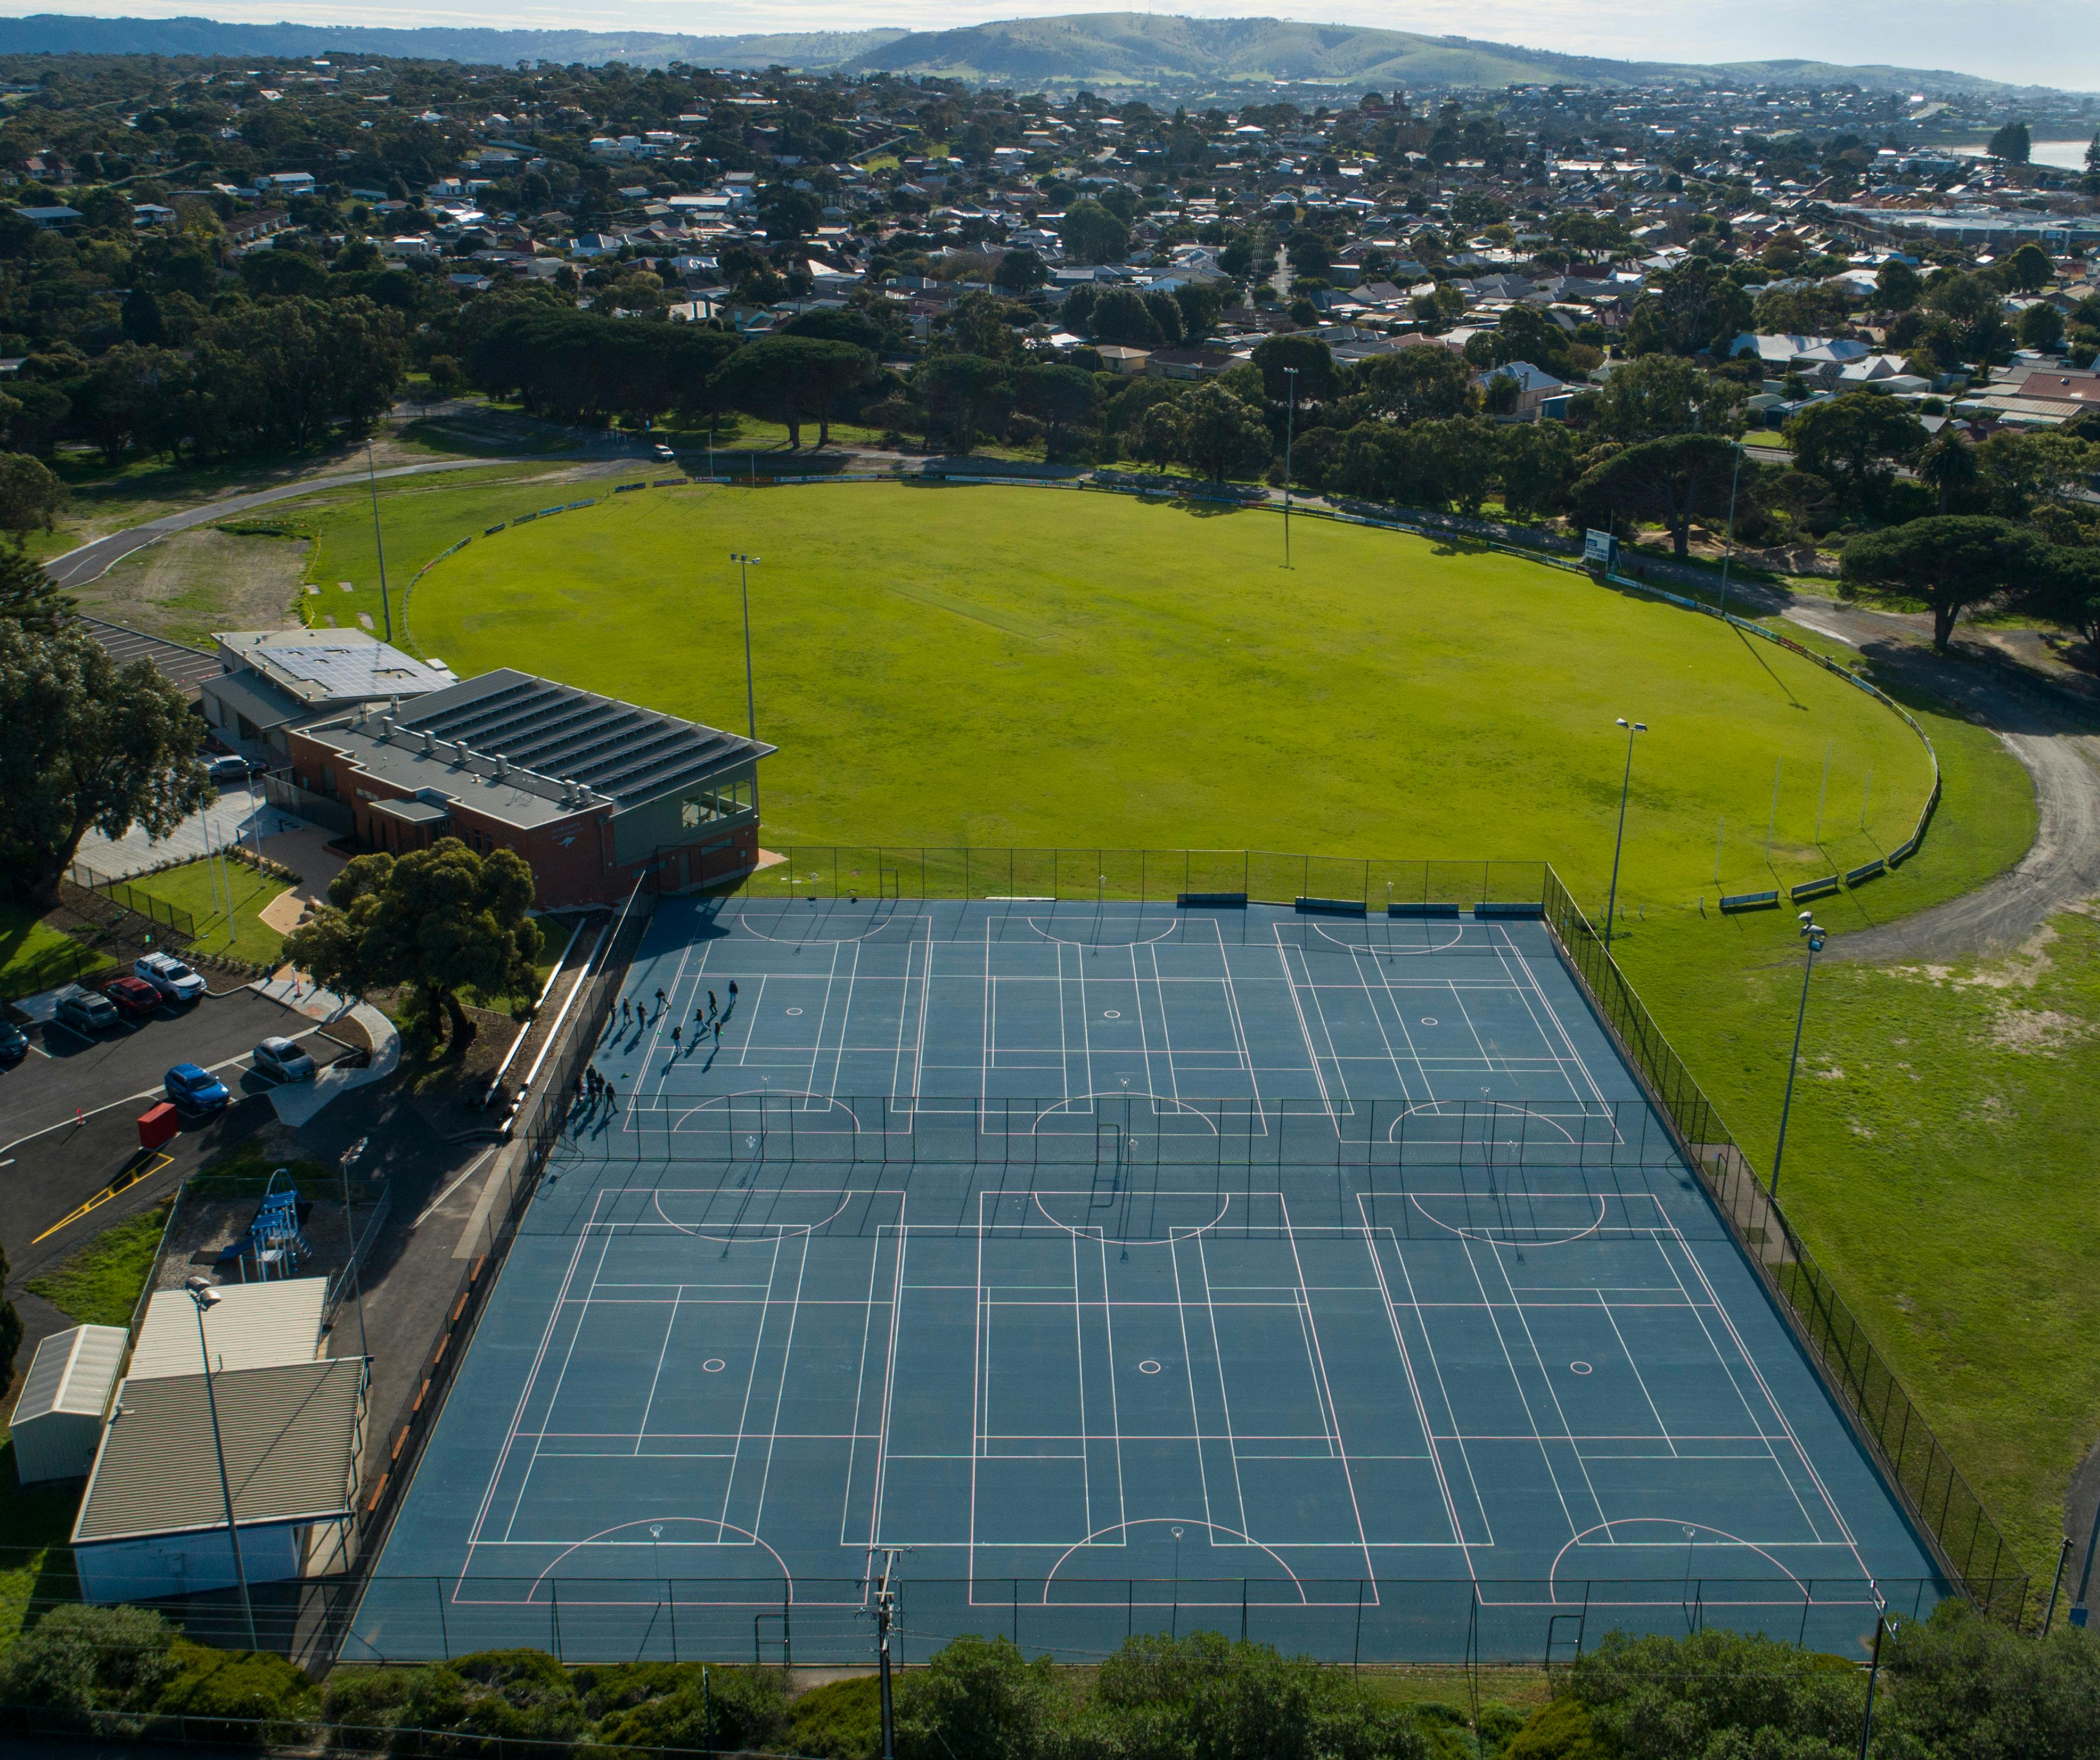 Sporting grounds with outdoor courts and oval